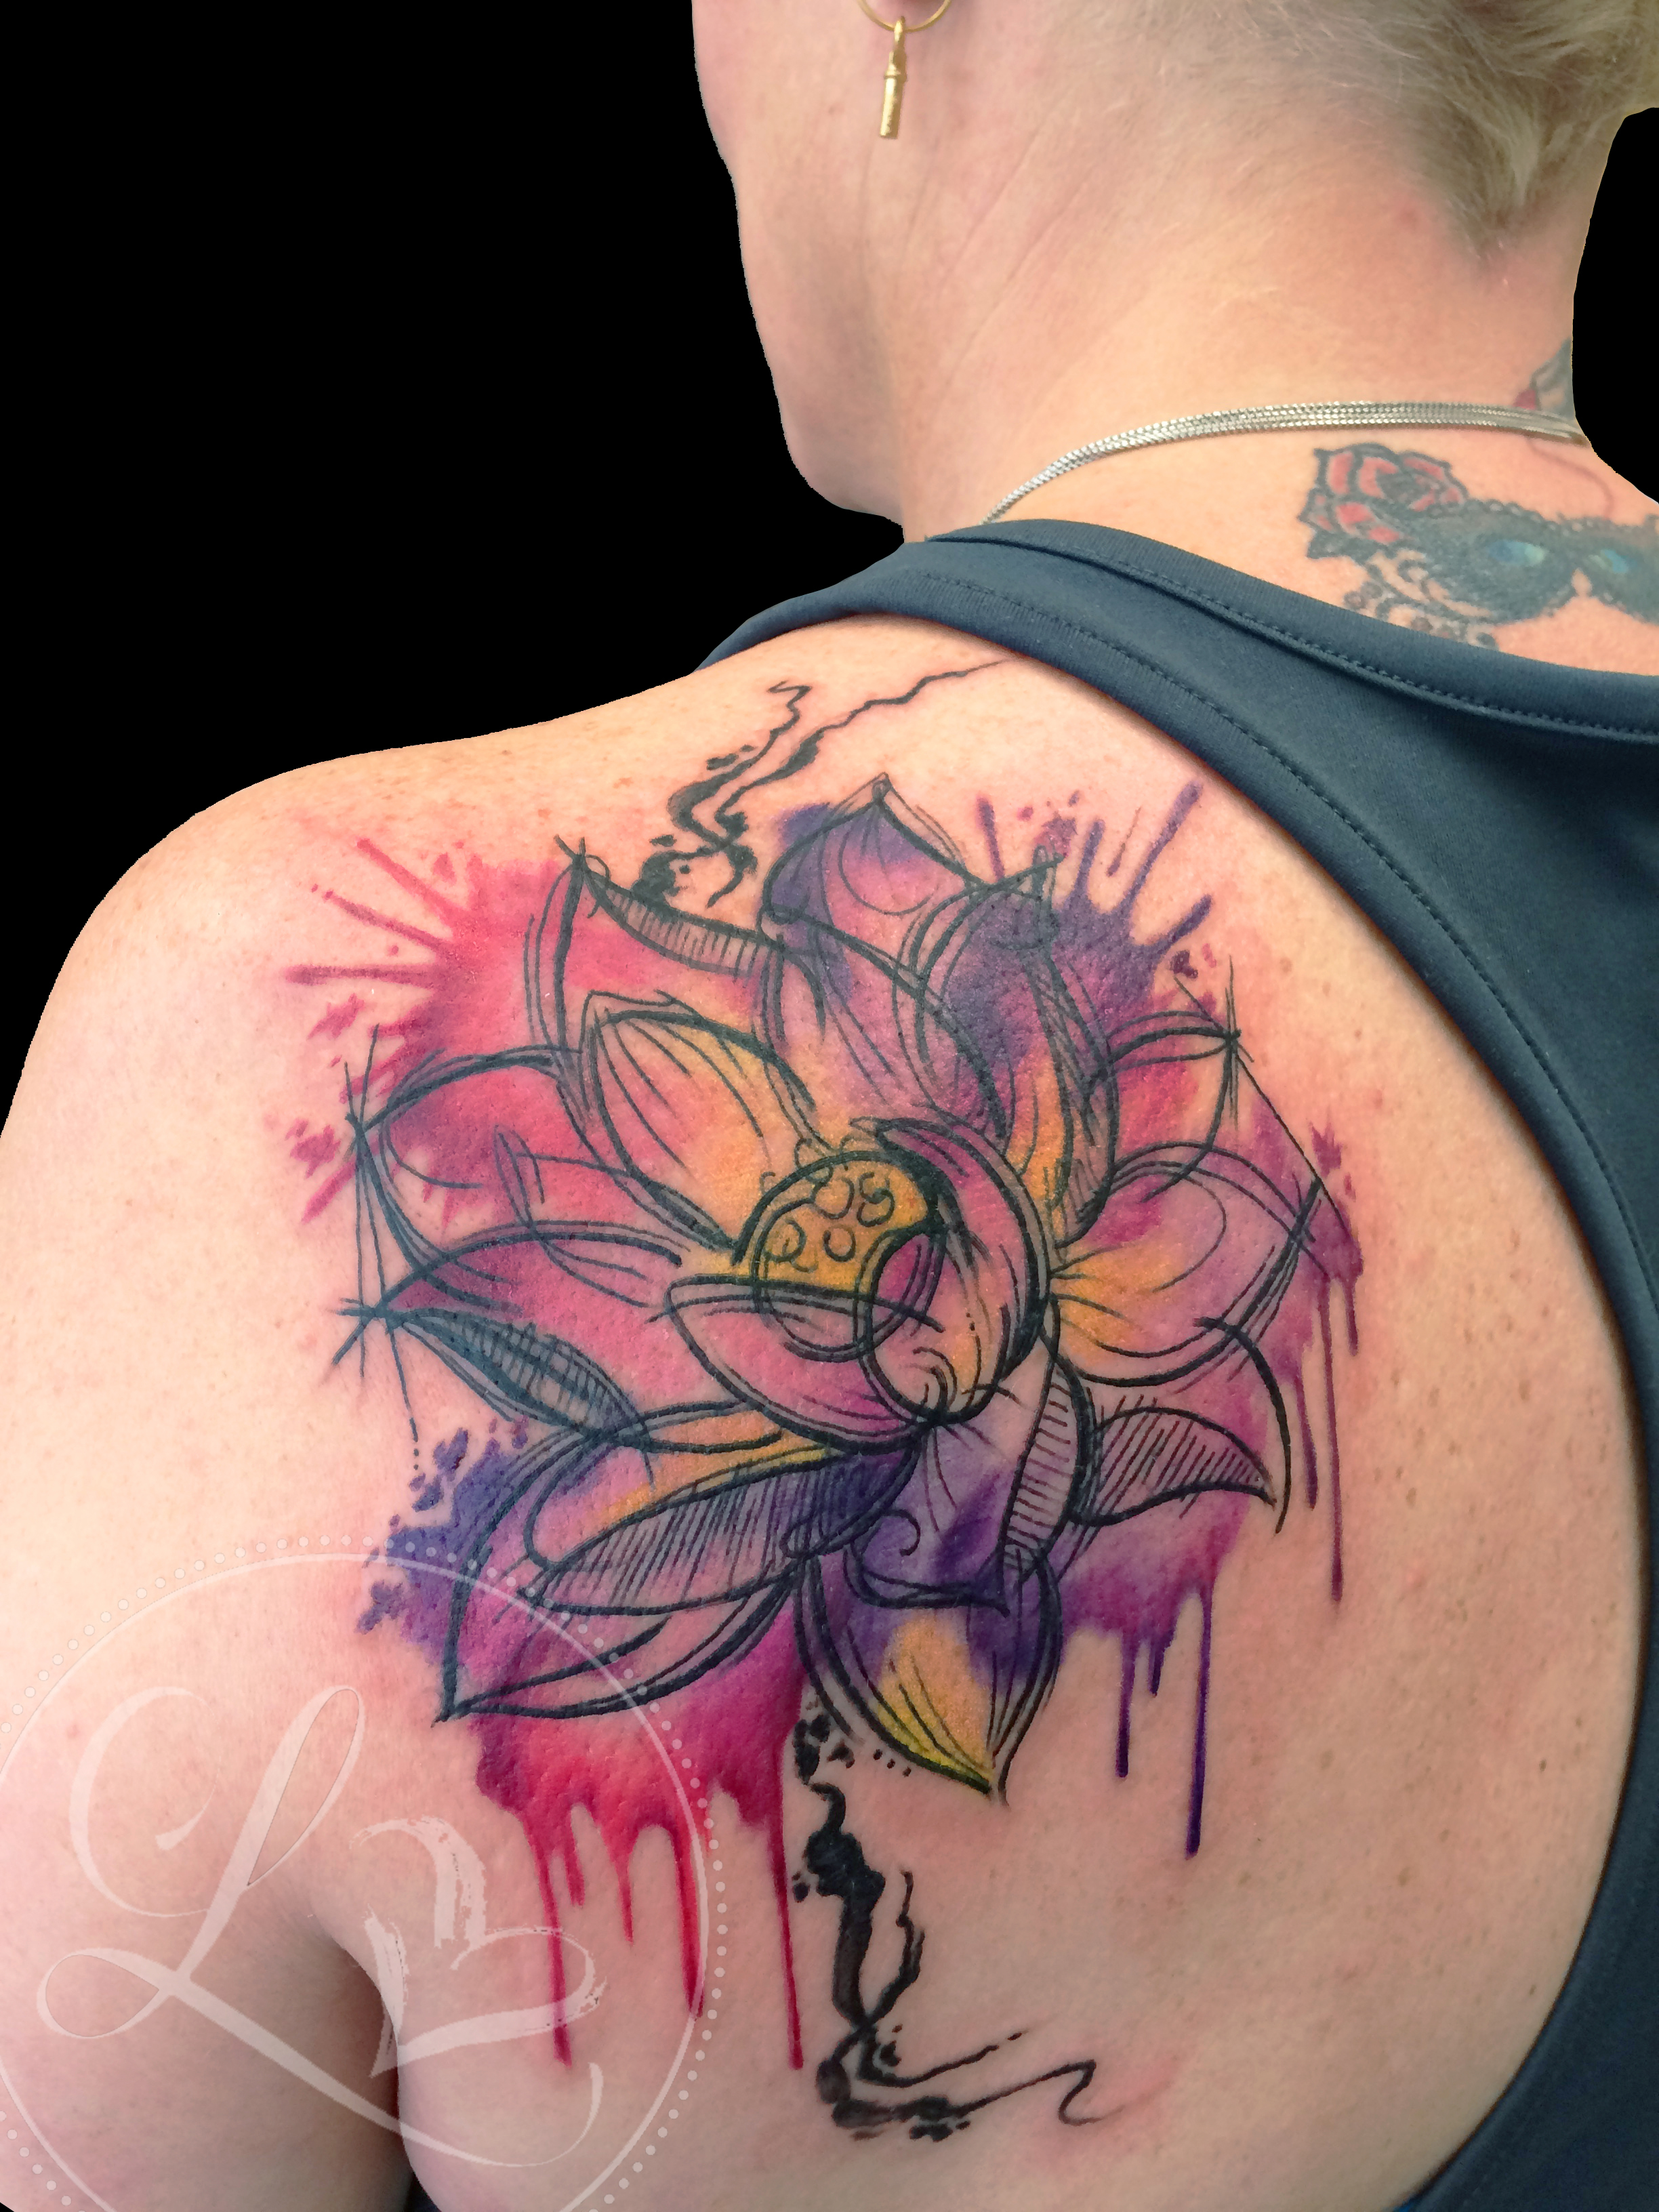 Colorful watercolor style lotus tattoo on a woman's scapula with sketchy linework